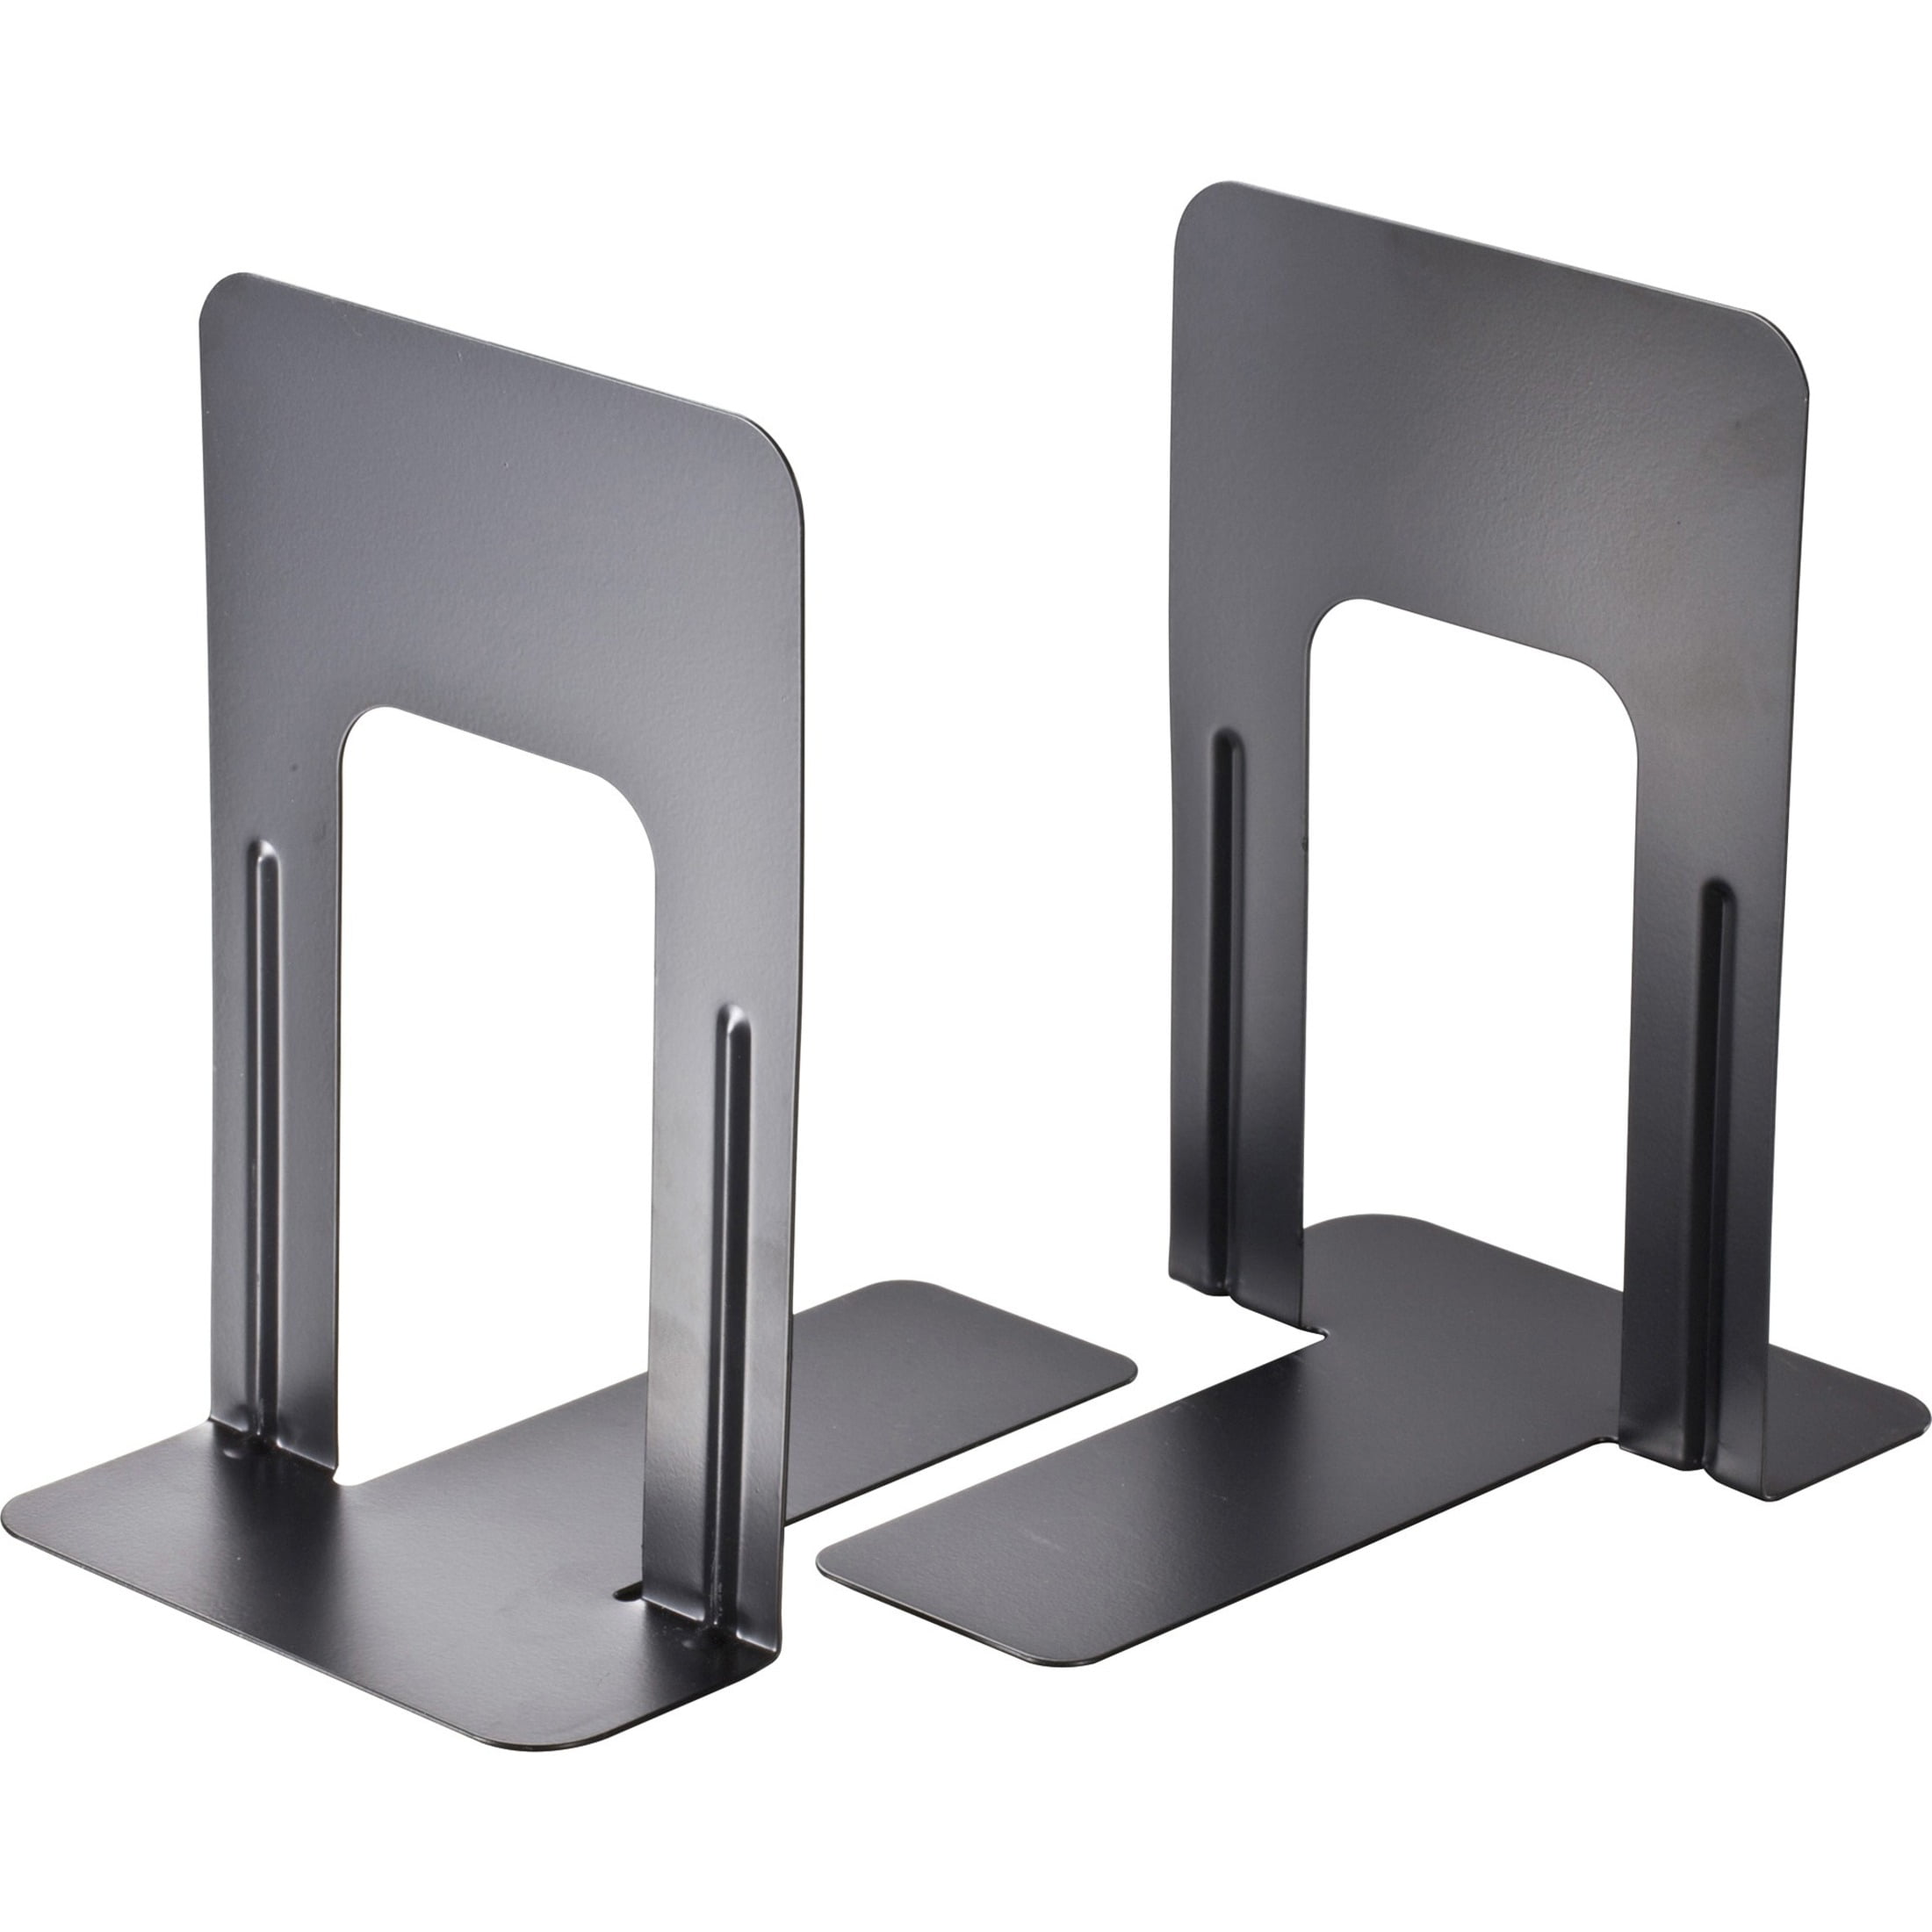 6.7 x 5.7 x 5.0 In Black Book Bookends Heavy Duty Metal Book Ends for Shelves 